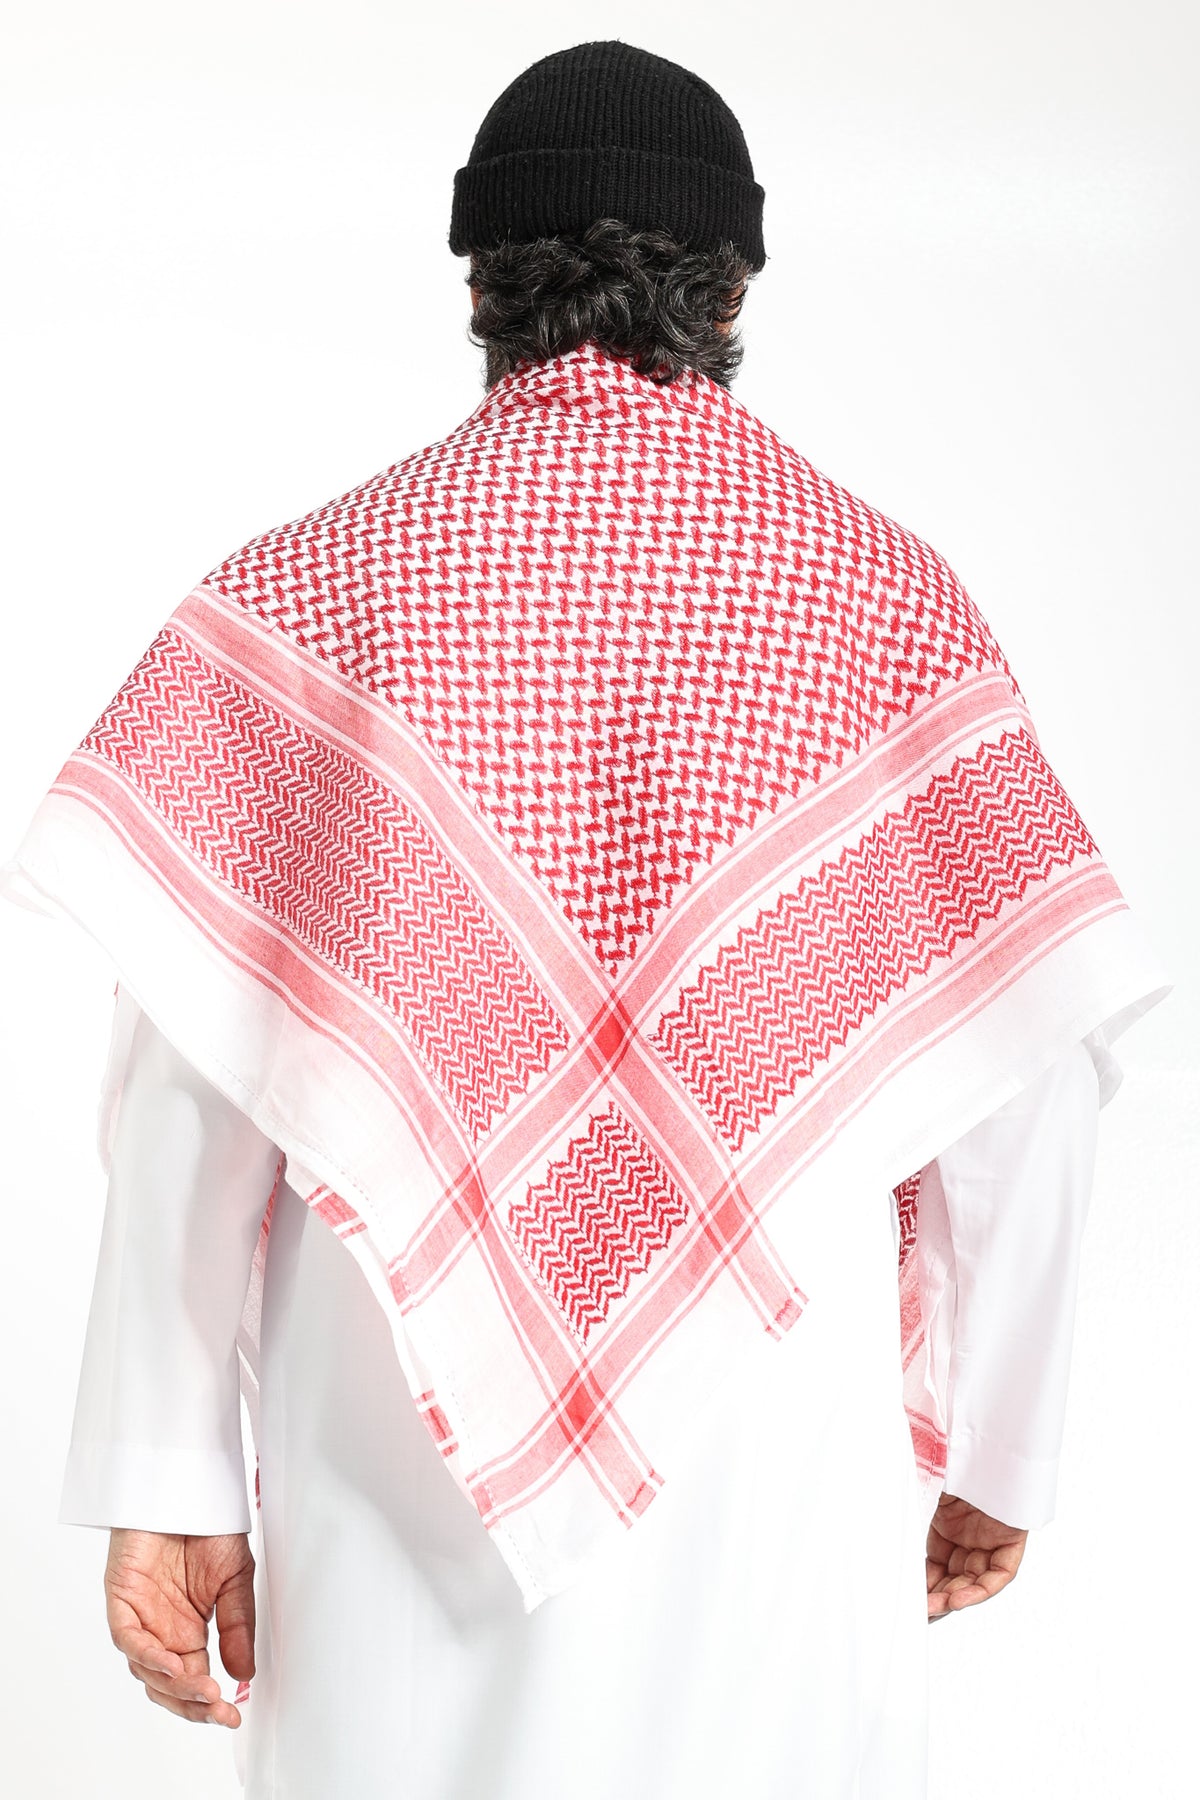 Arab Red White Shemagh - JLifestyle Store